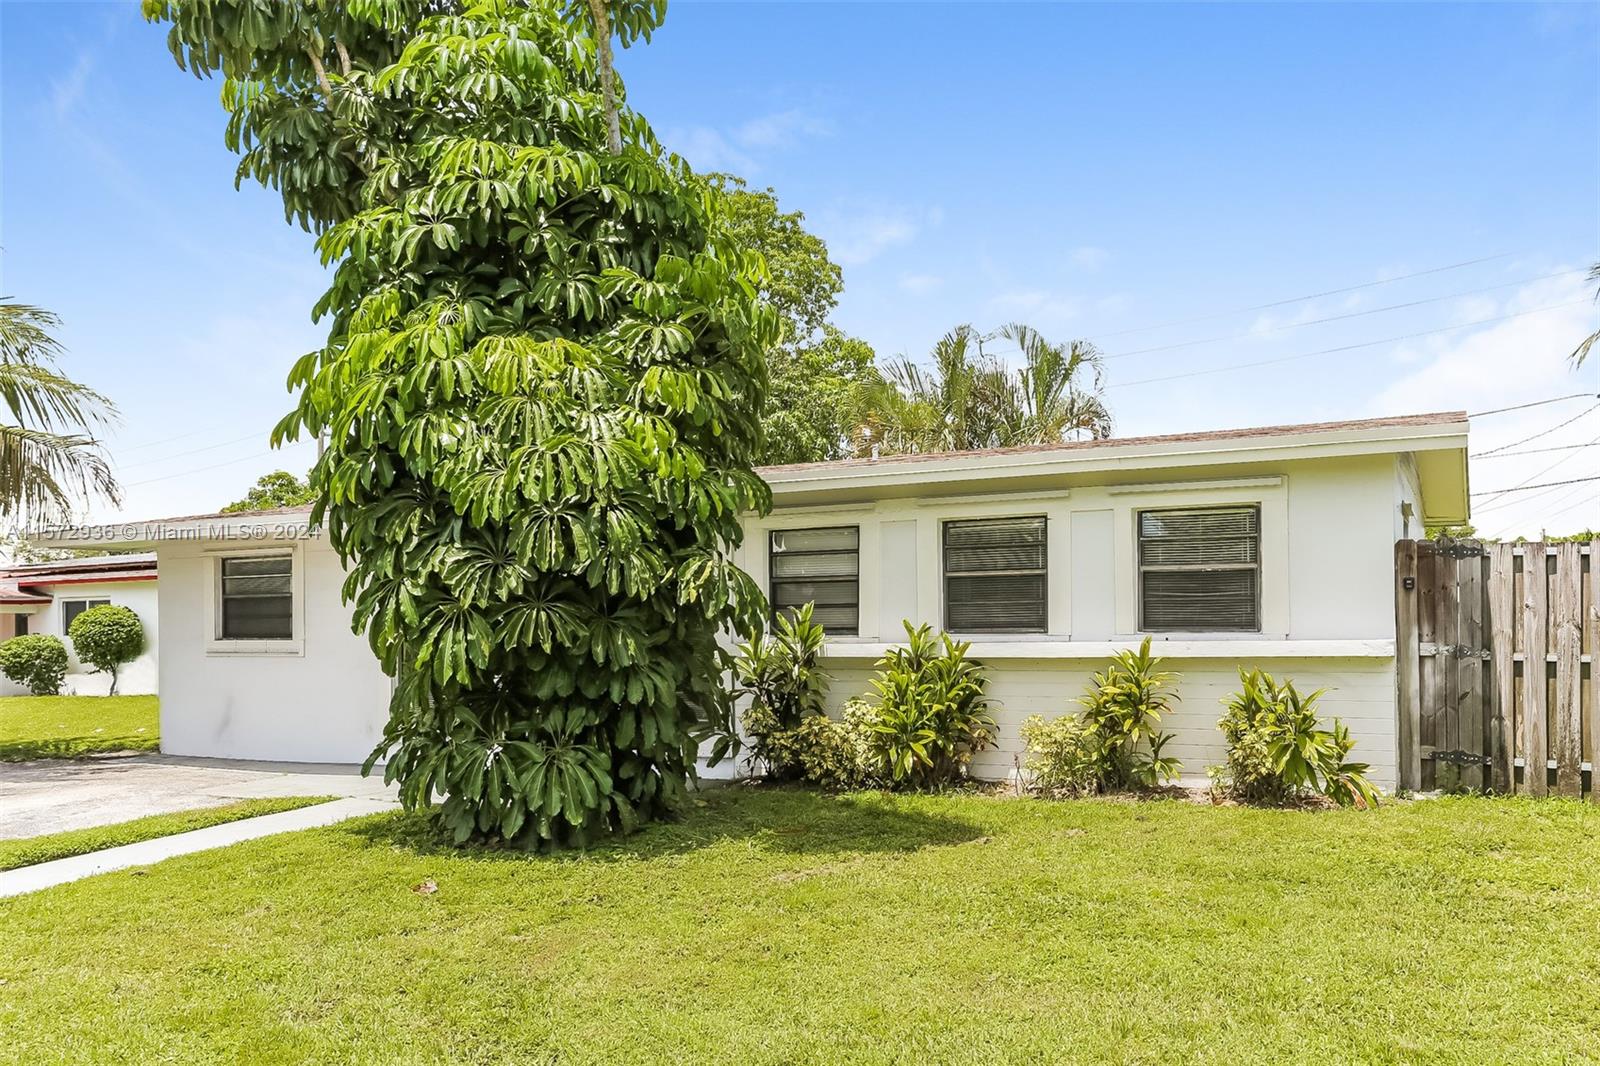 4721 NW 12th St, Lauderhill, Florida 33313, 3 Bedrooms Bedrooms, ,1 BathroomBathrooms,Residentiallease,For Rent,4721 NW 12th St,A11572936